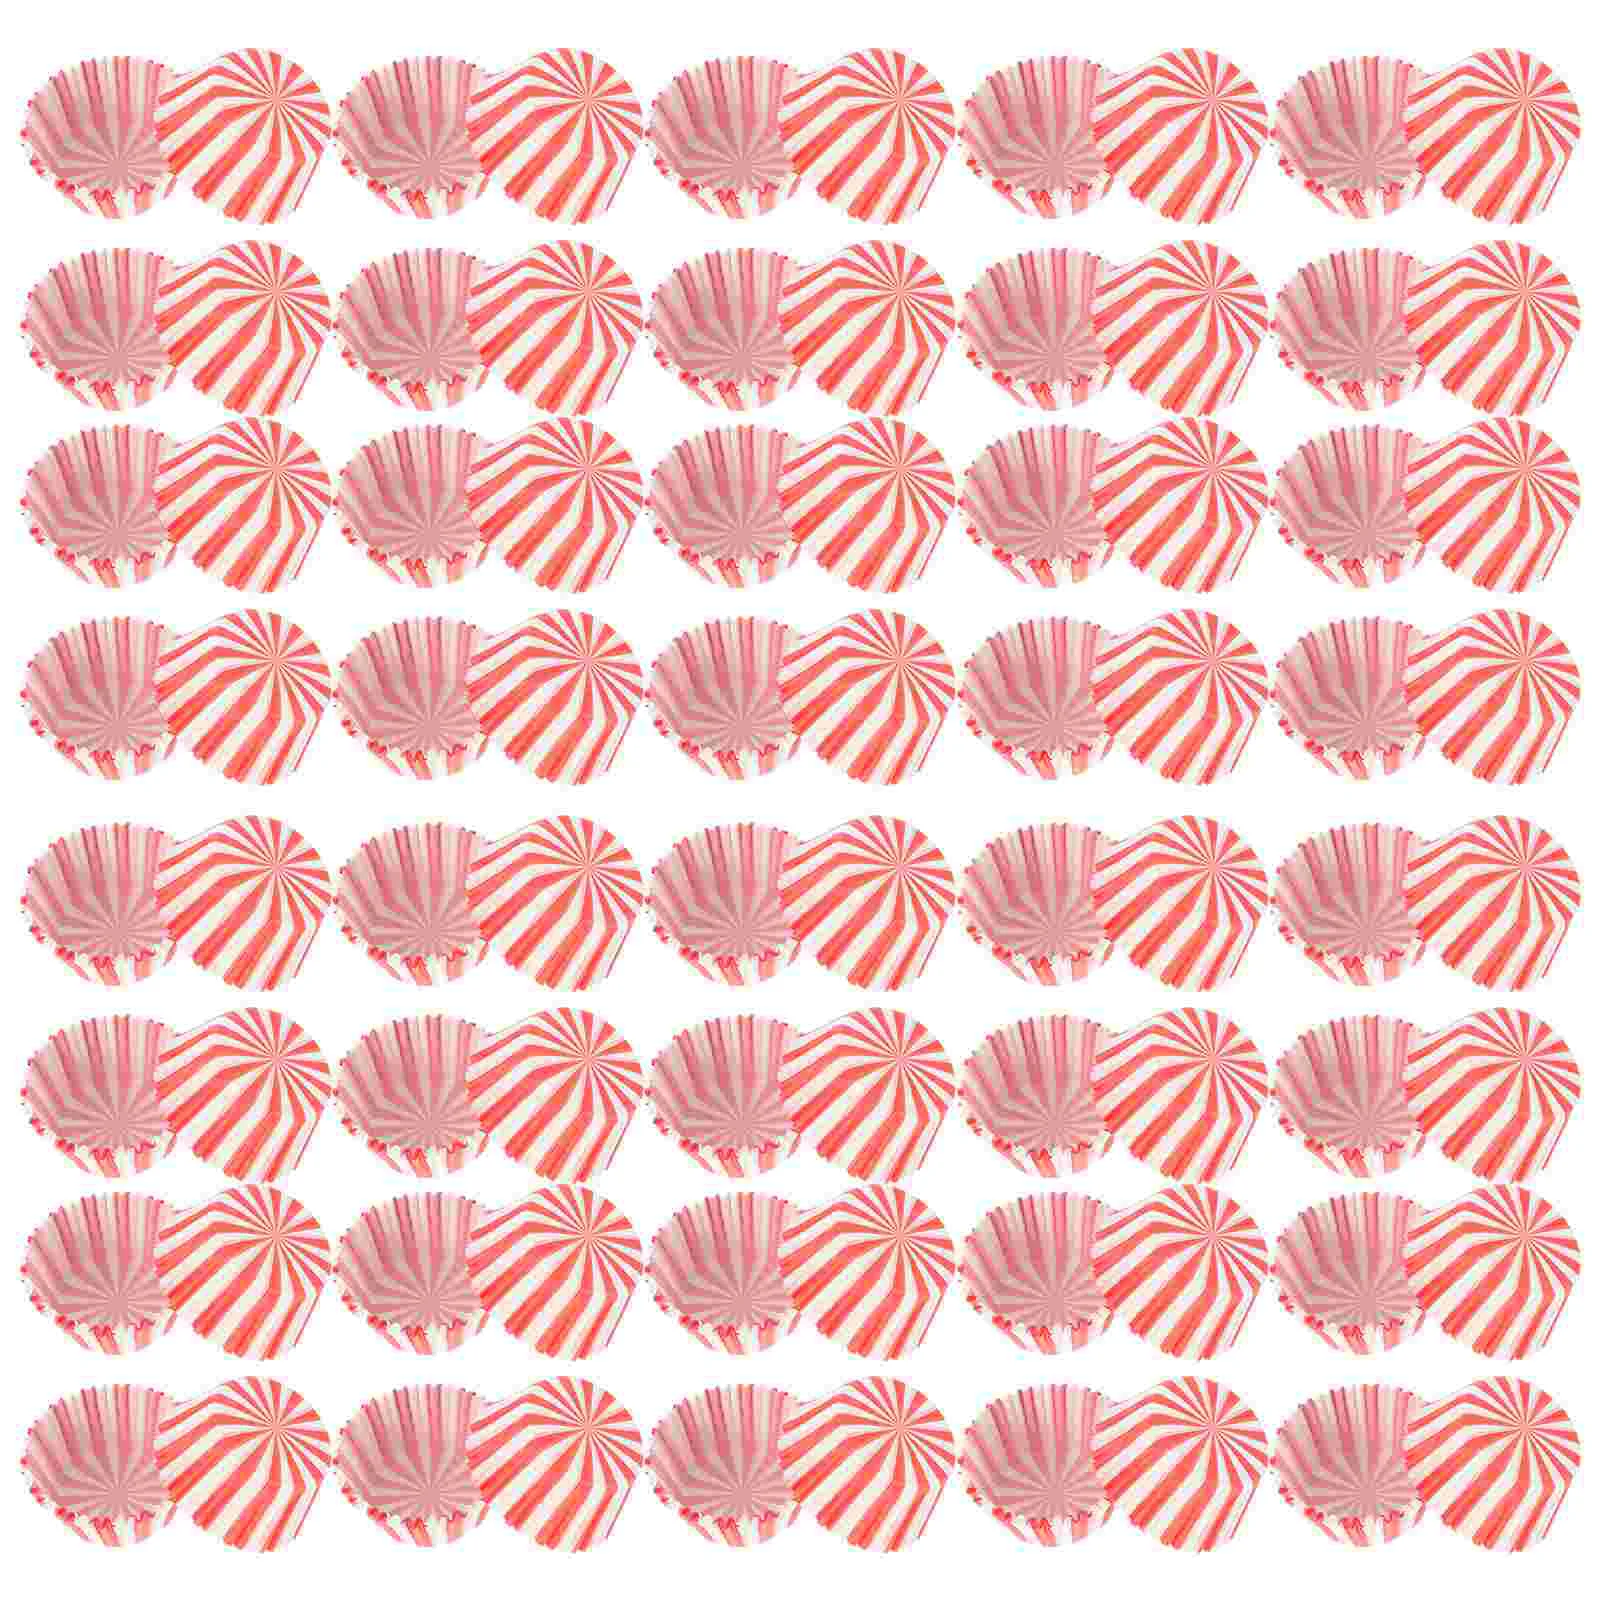 

Red and White Muffin Cups 100pcs Stripes Cups Mini Cupcake Liners Cupcake Holders Liners Cupcake Wrappers for Bridal Showers,